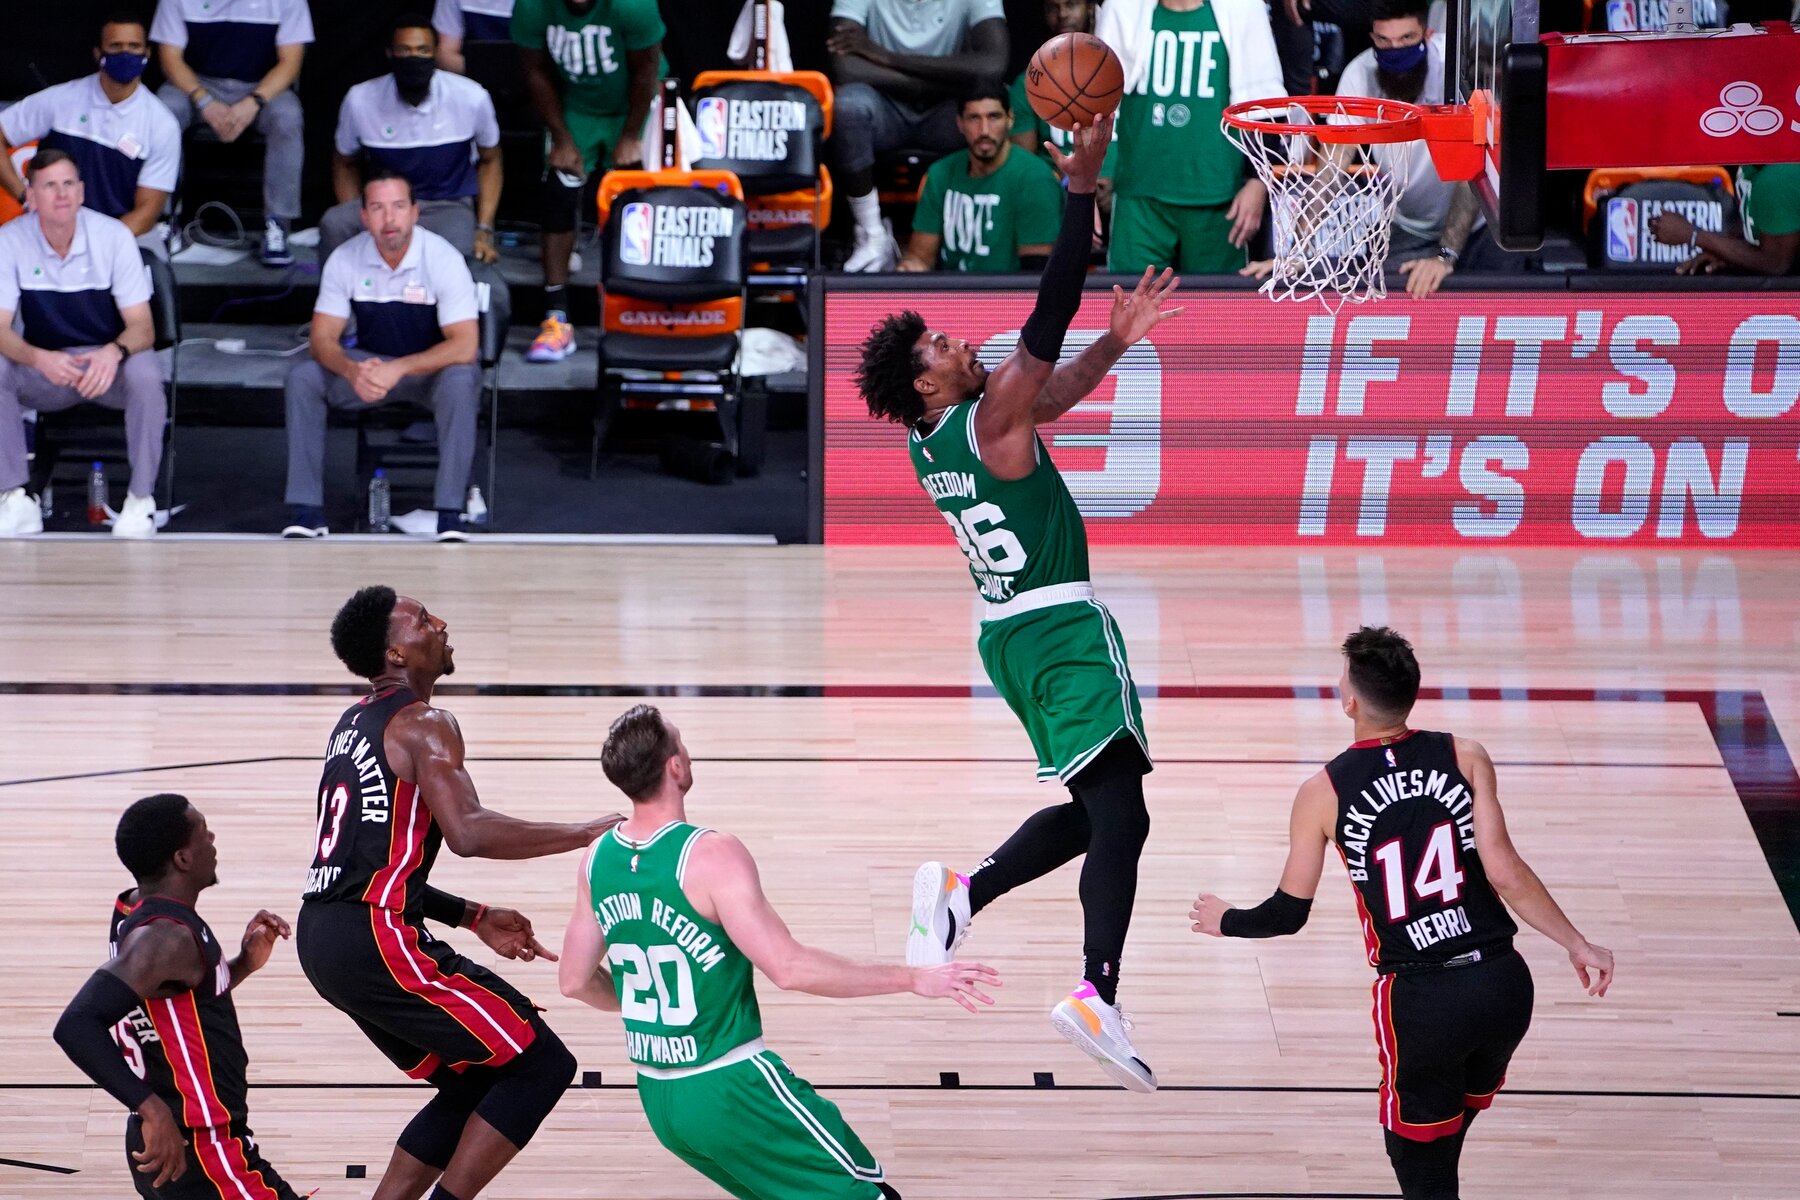 NBA Playoffs Celtics beat Heat in Game 5 to extend series 23 in ECF